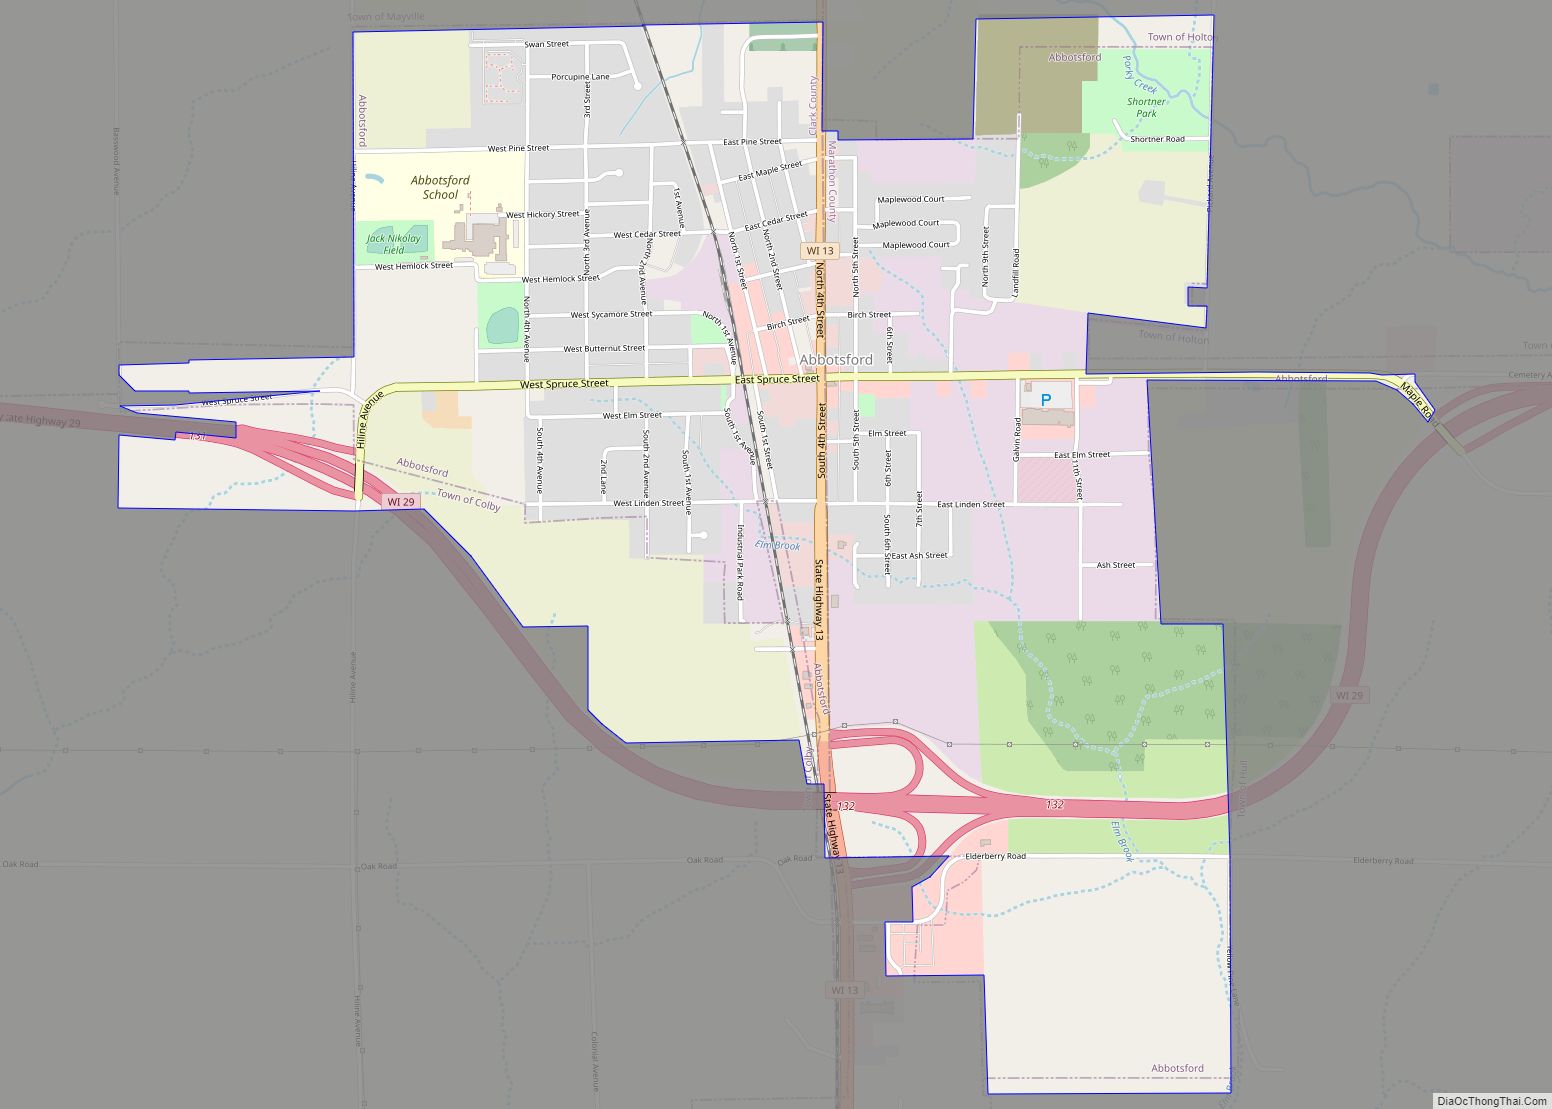 Map of Abbotsford city